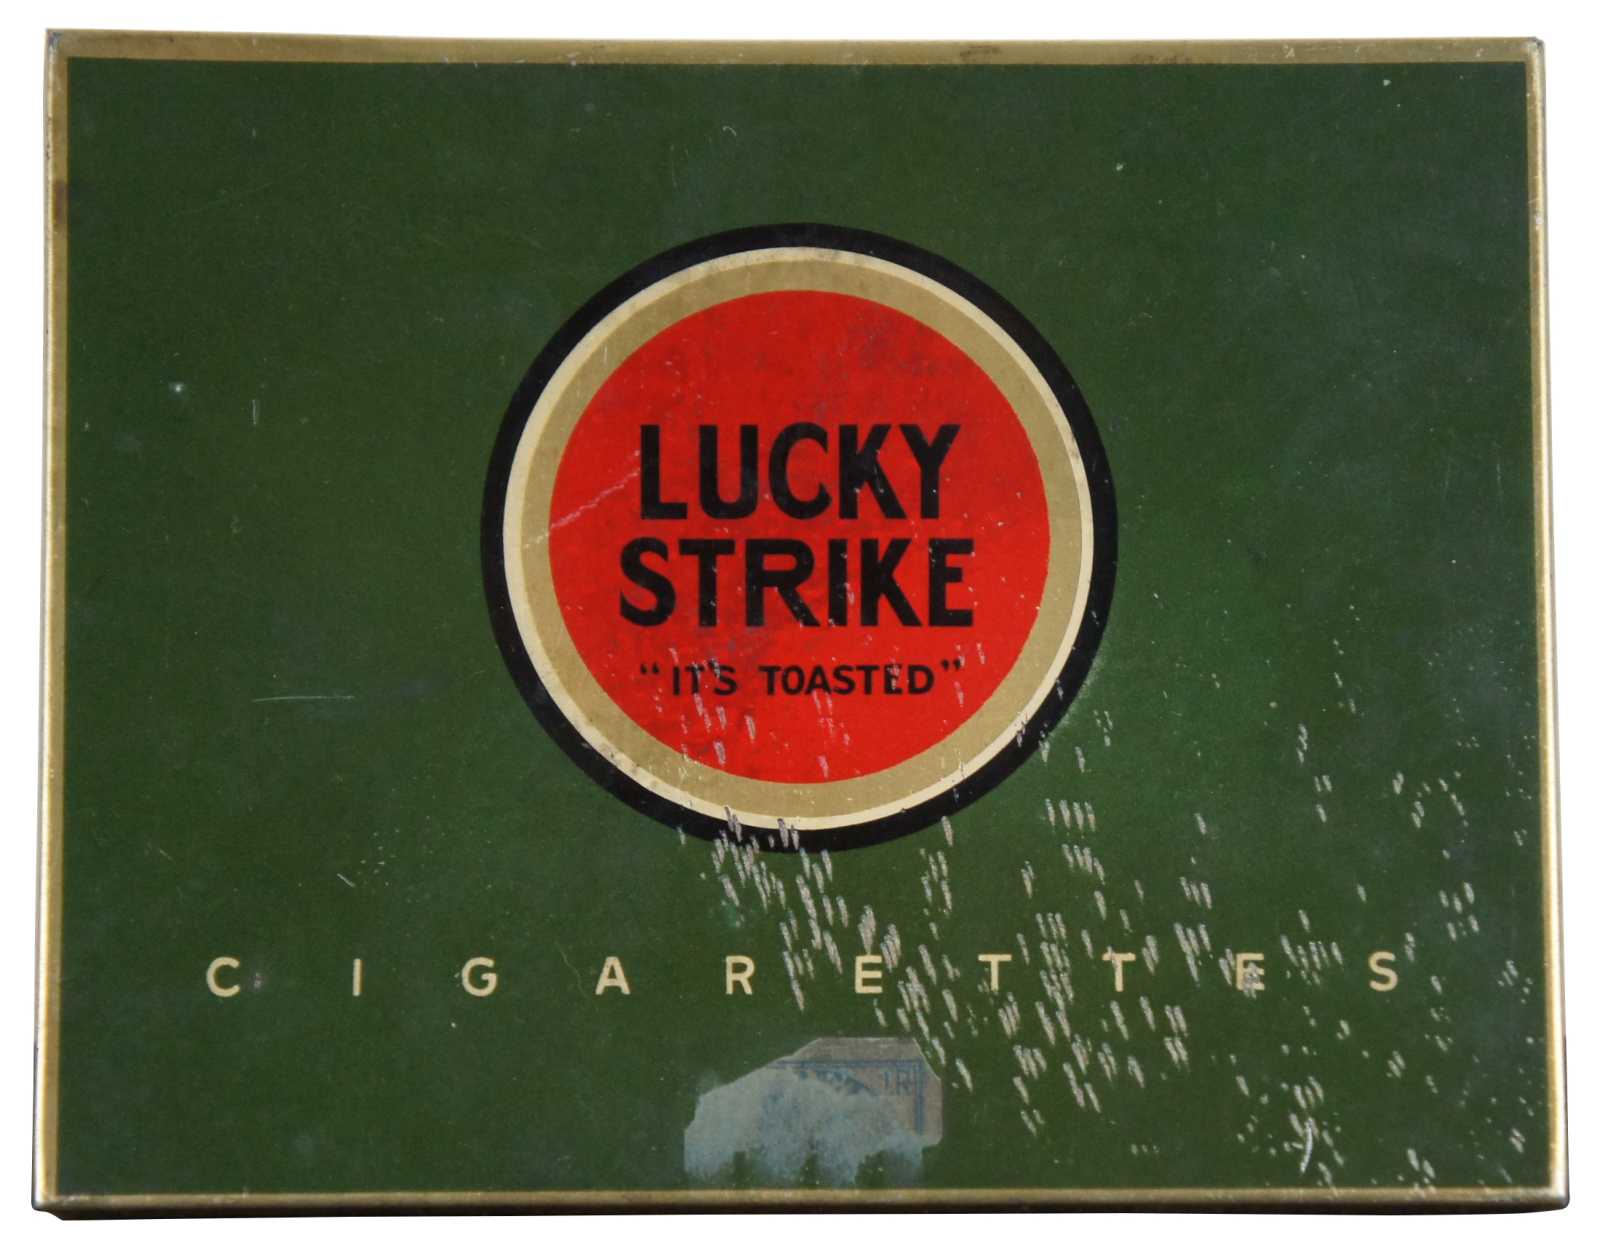 1940 Antique Lucky Strike It's Toasted Advertising Cigarette Tin Tobacco  Box 6